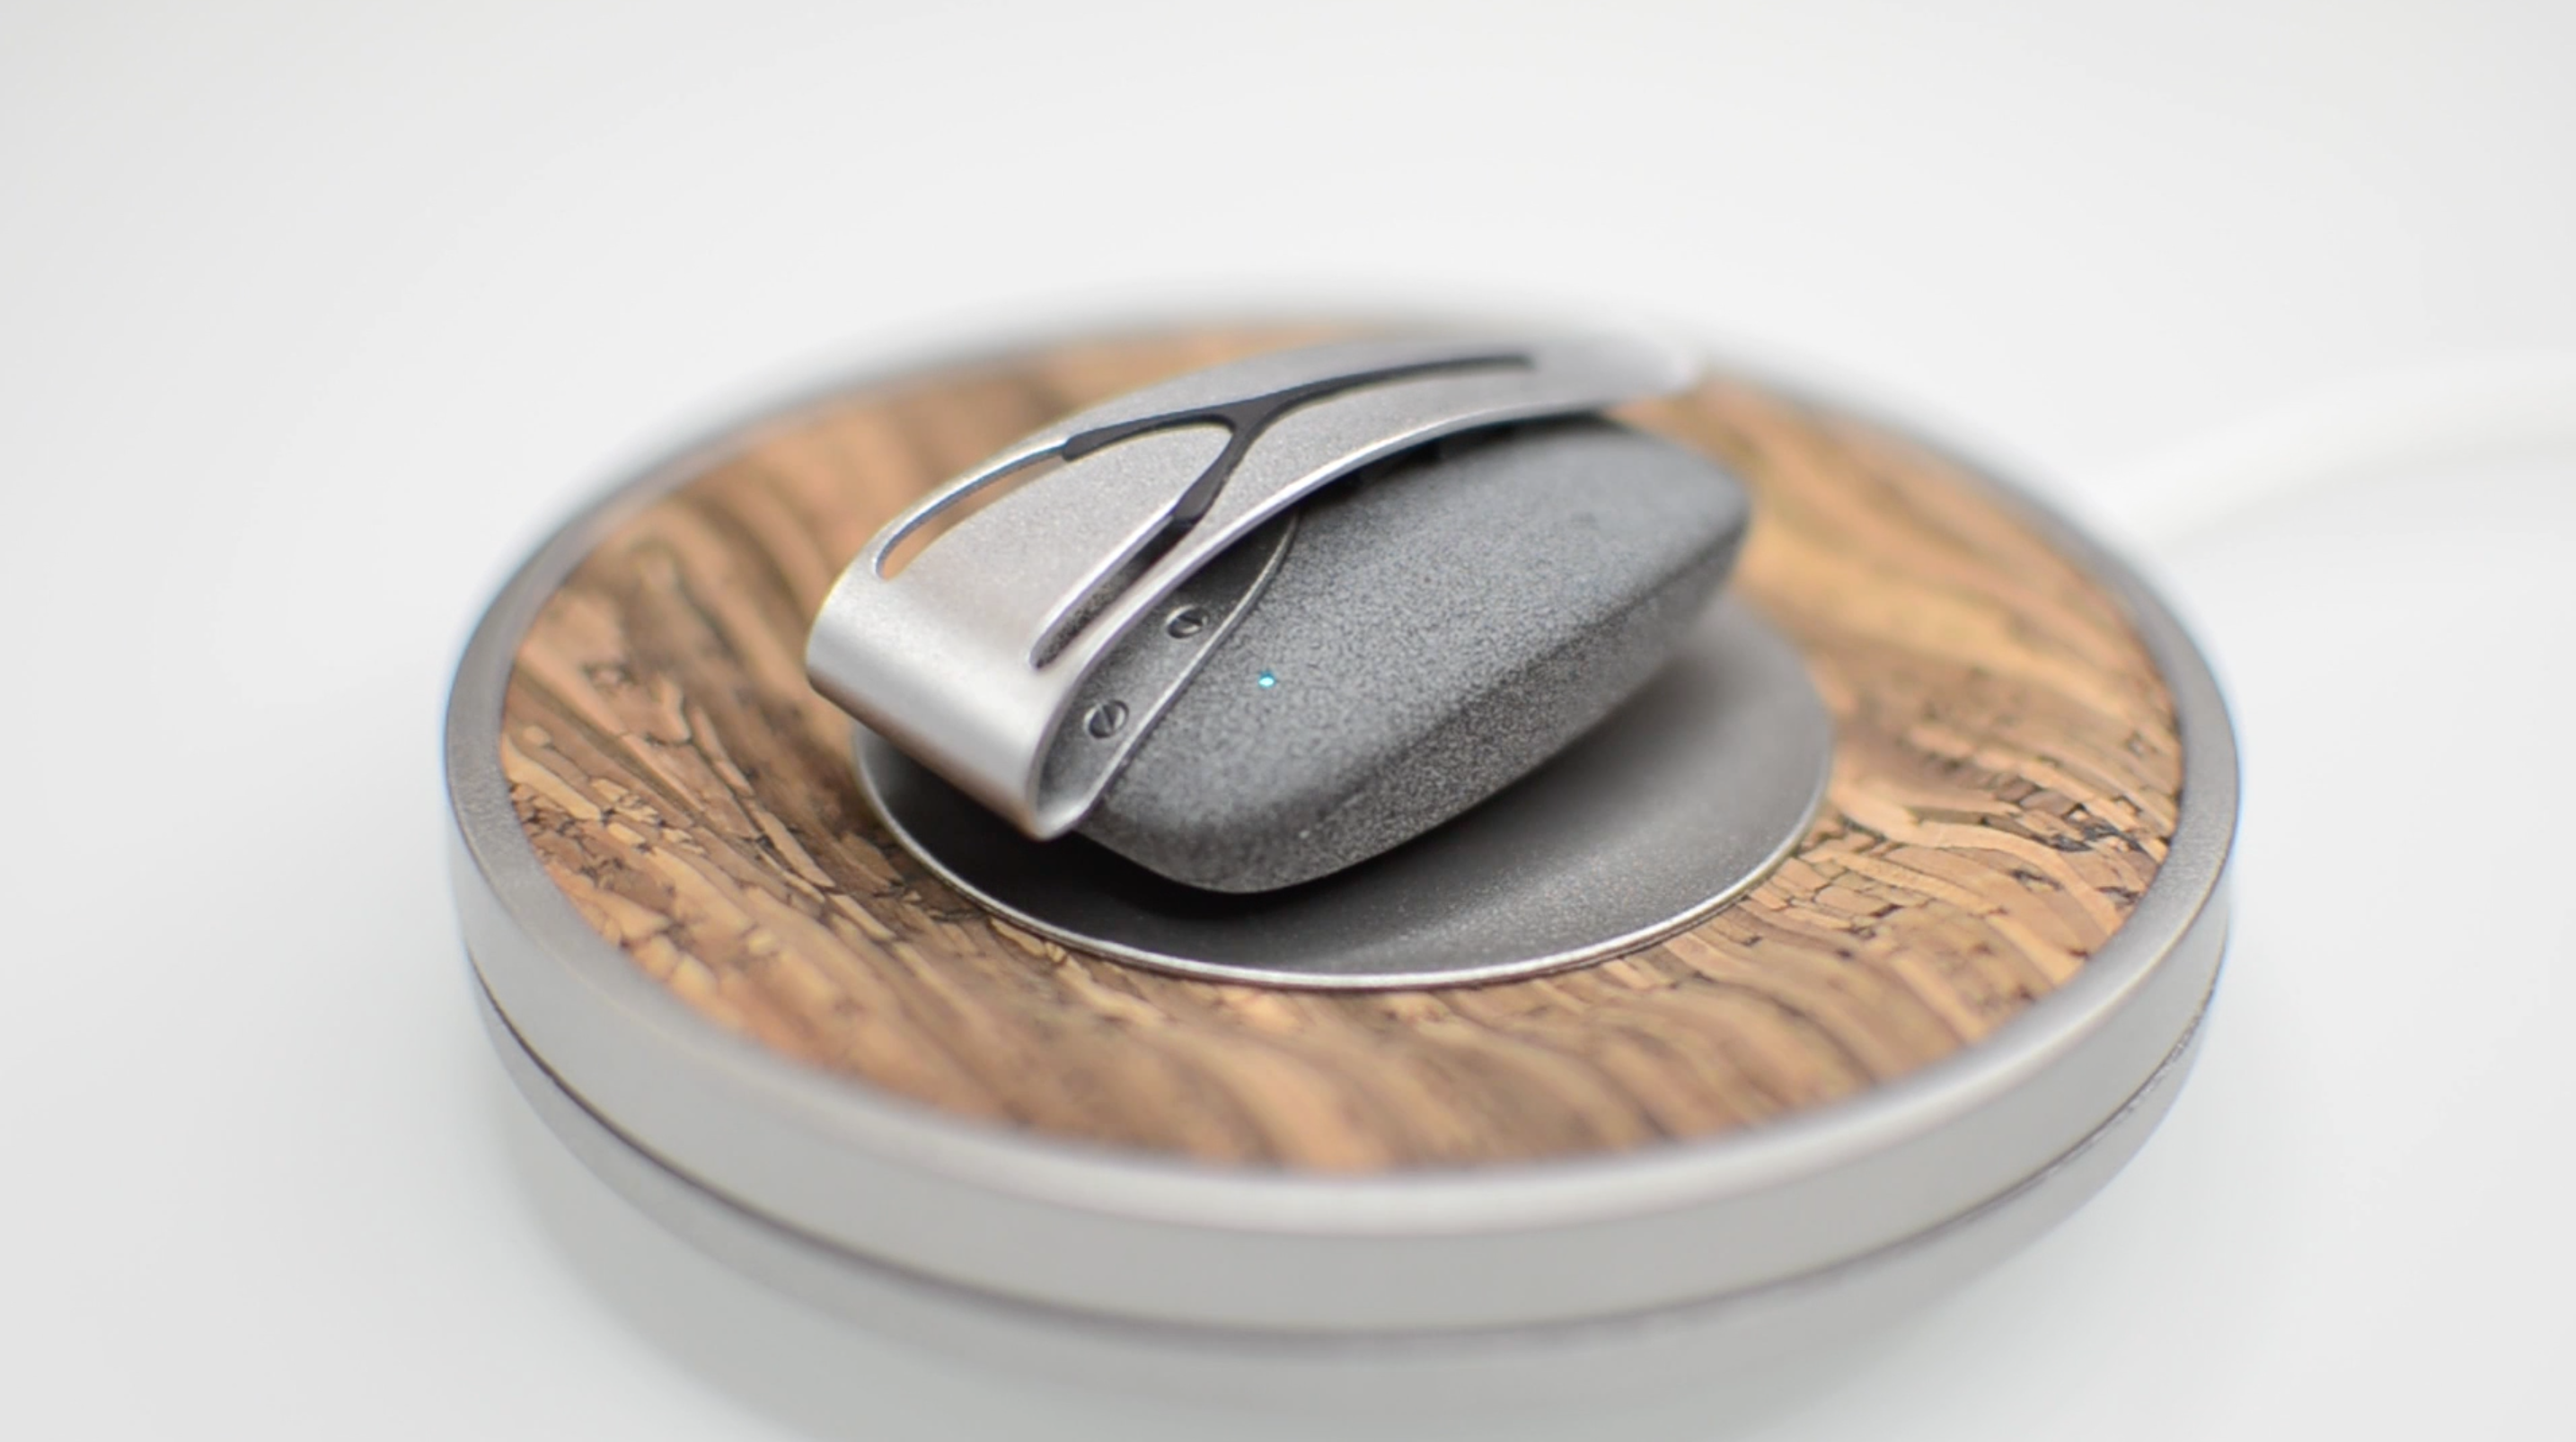 Hands-On with the Spire Activity Tracker